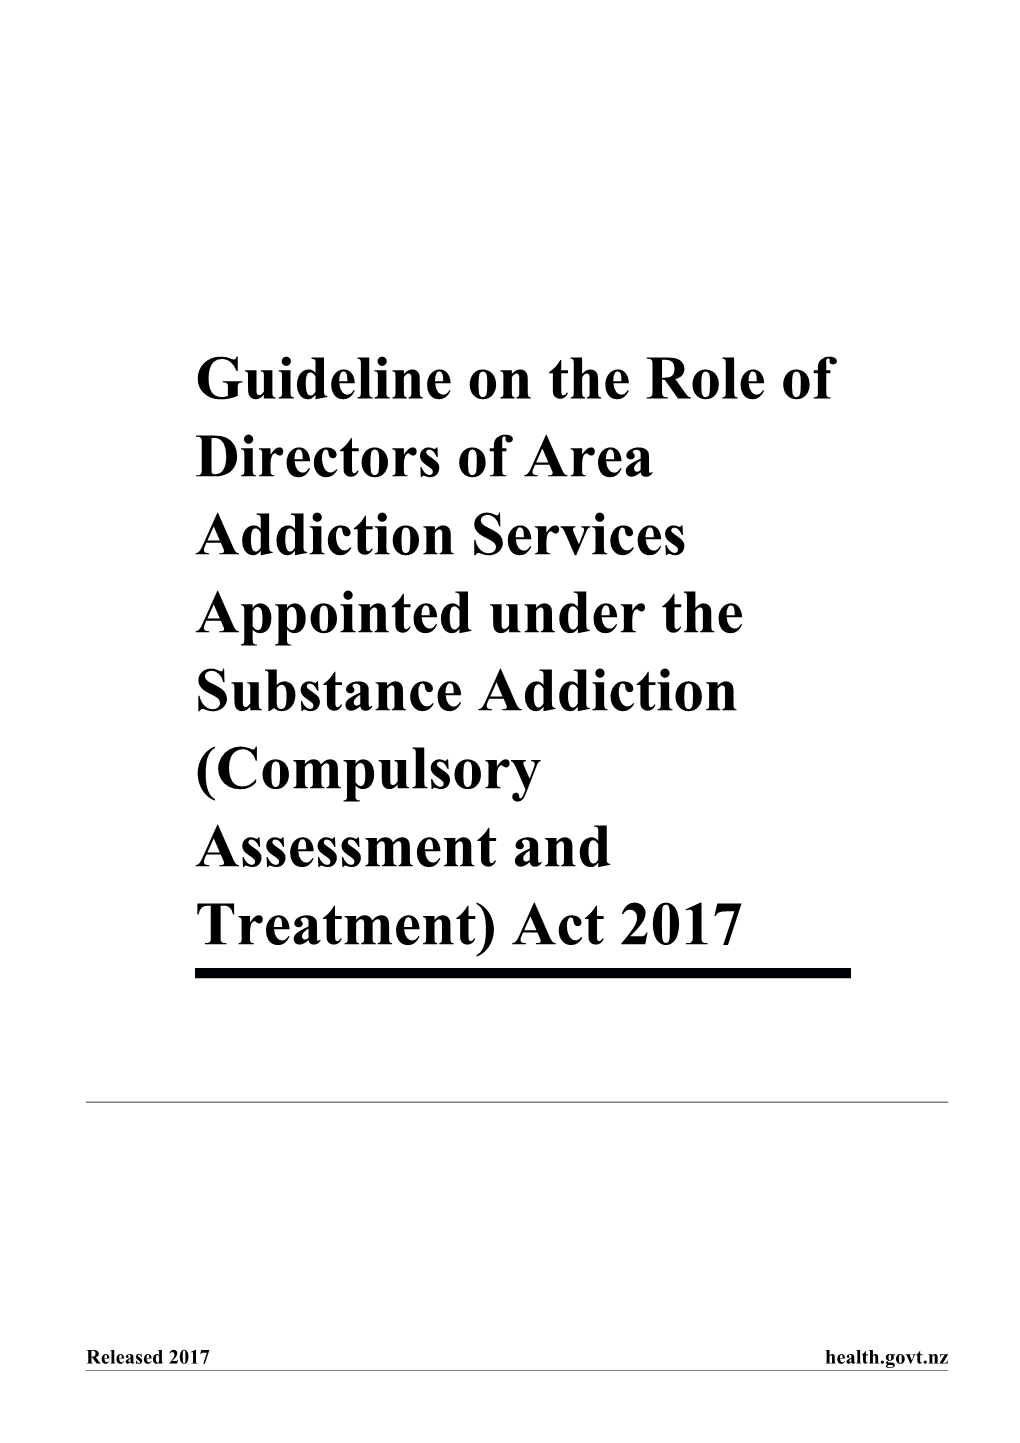 Guideline on the Role of Directors of Area Addiction Services Appointed Under the Substance